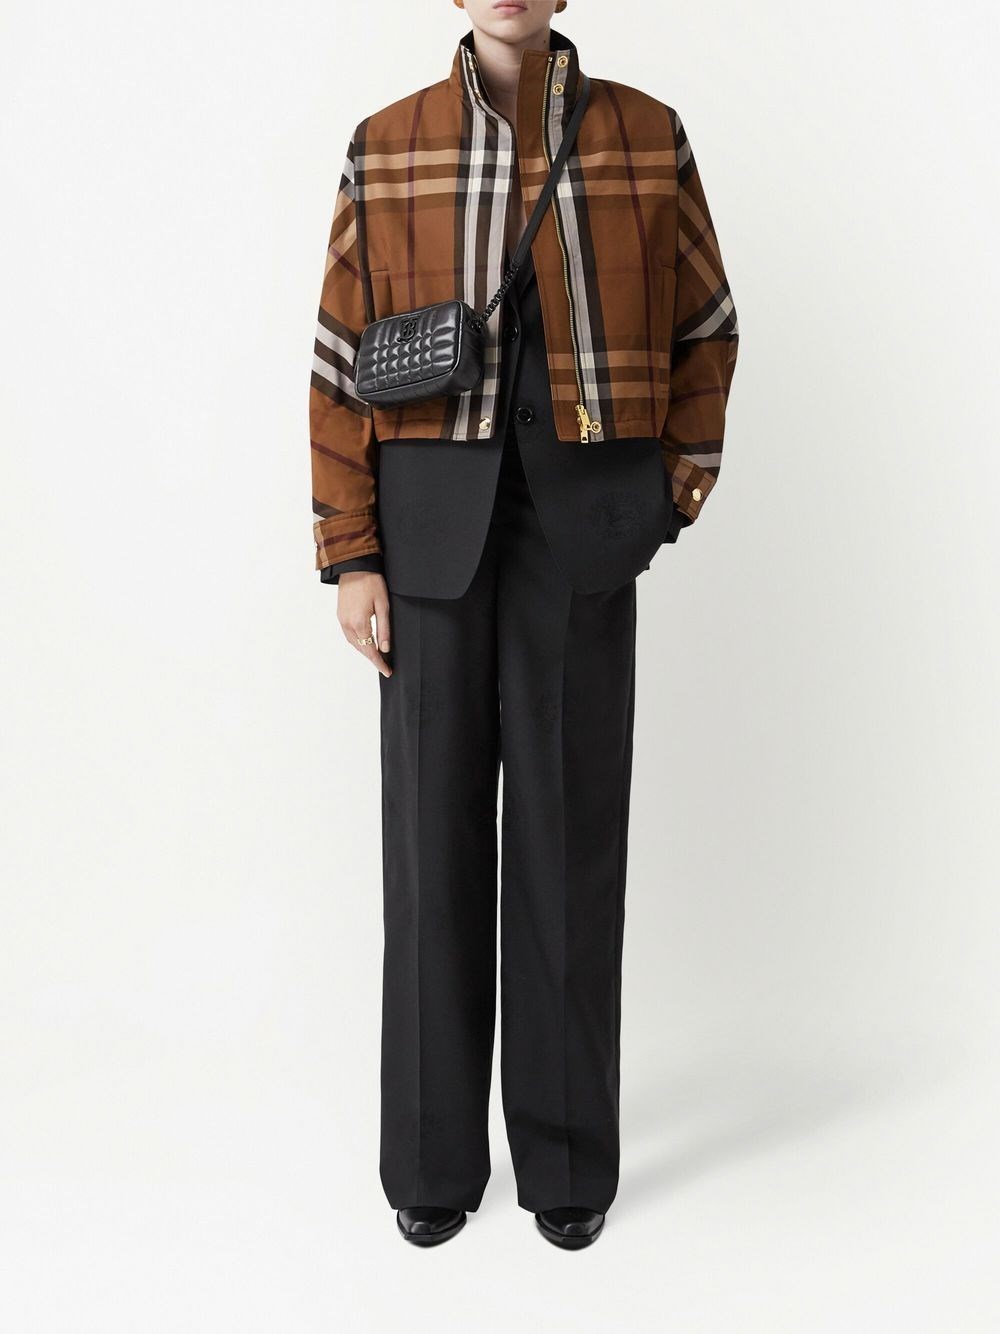 burberry AYTON JACKET available on montiboutique.com - 51273